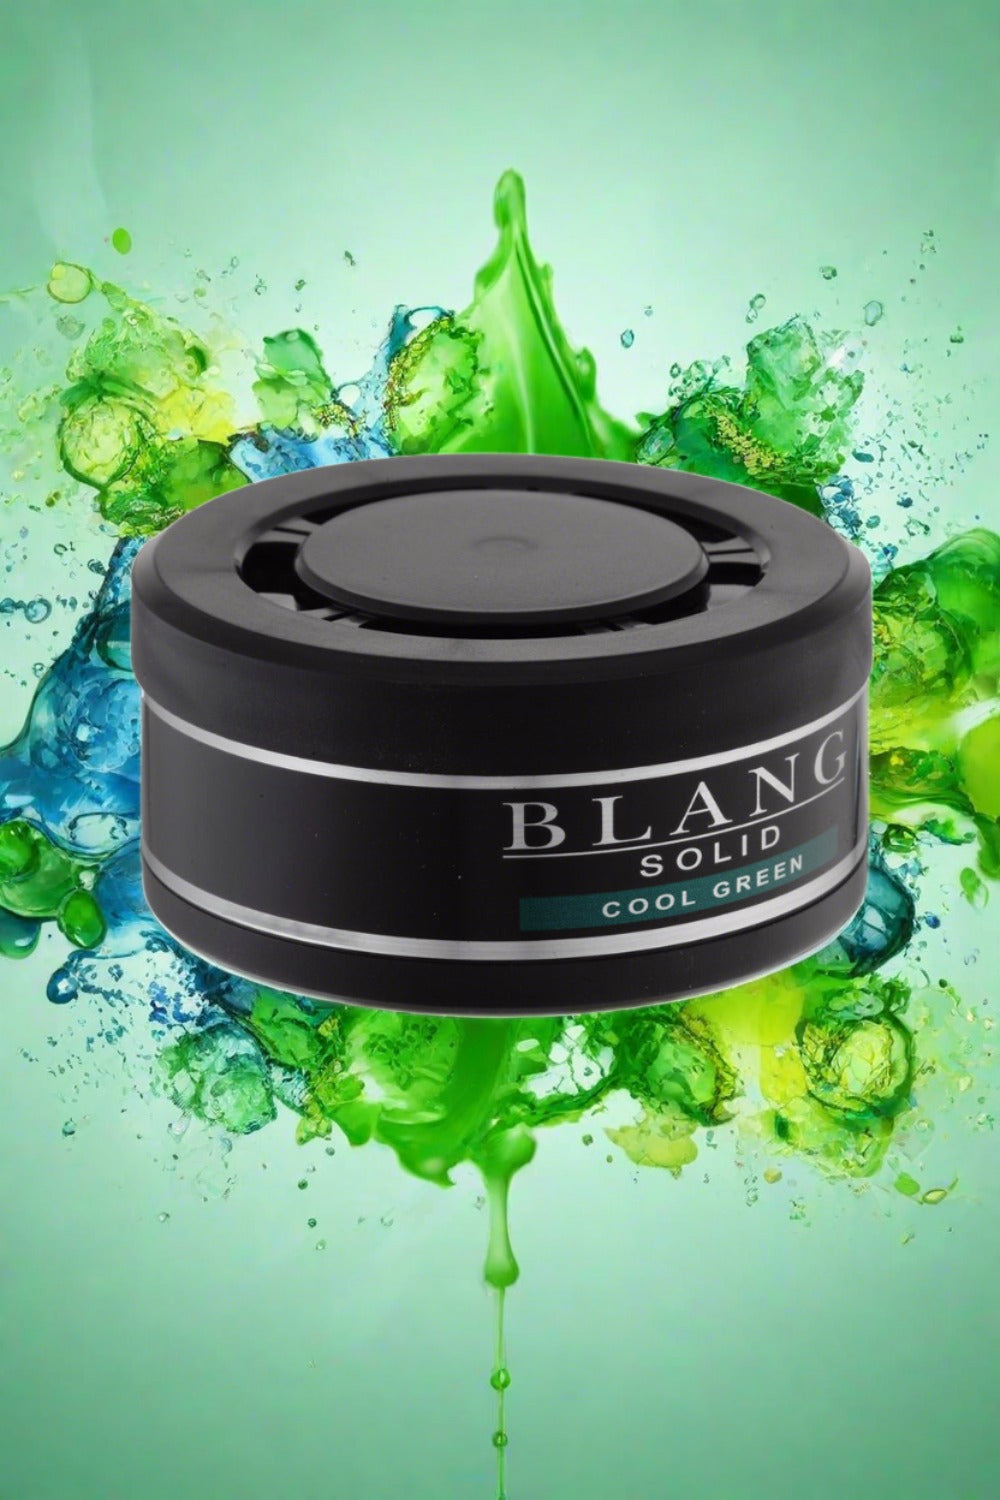 Blang Solid 3P Cool Green - Pack of 3Pcs